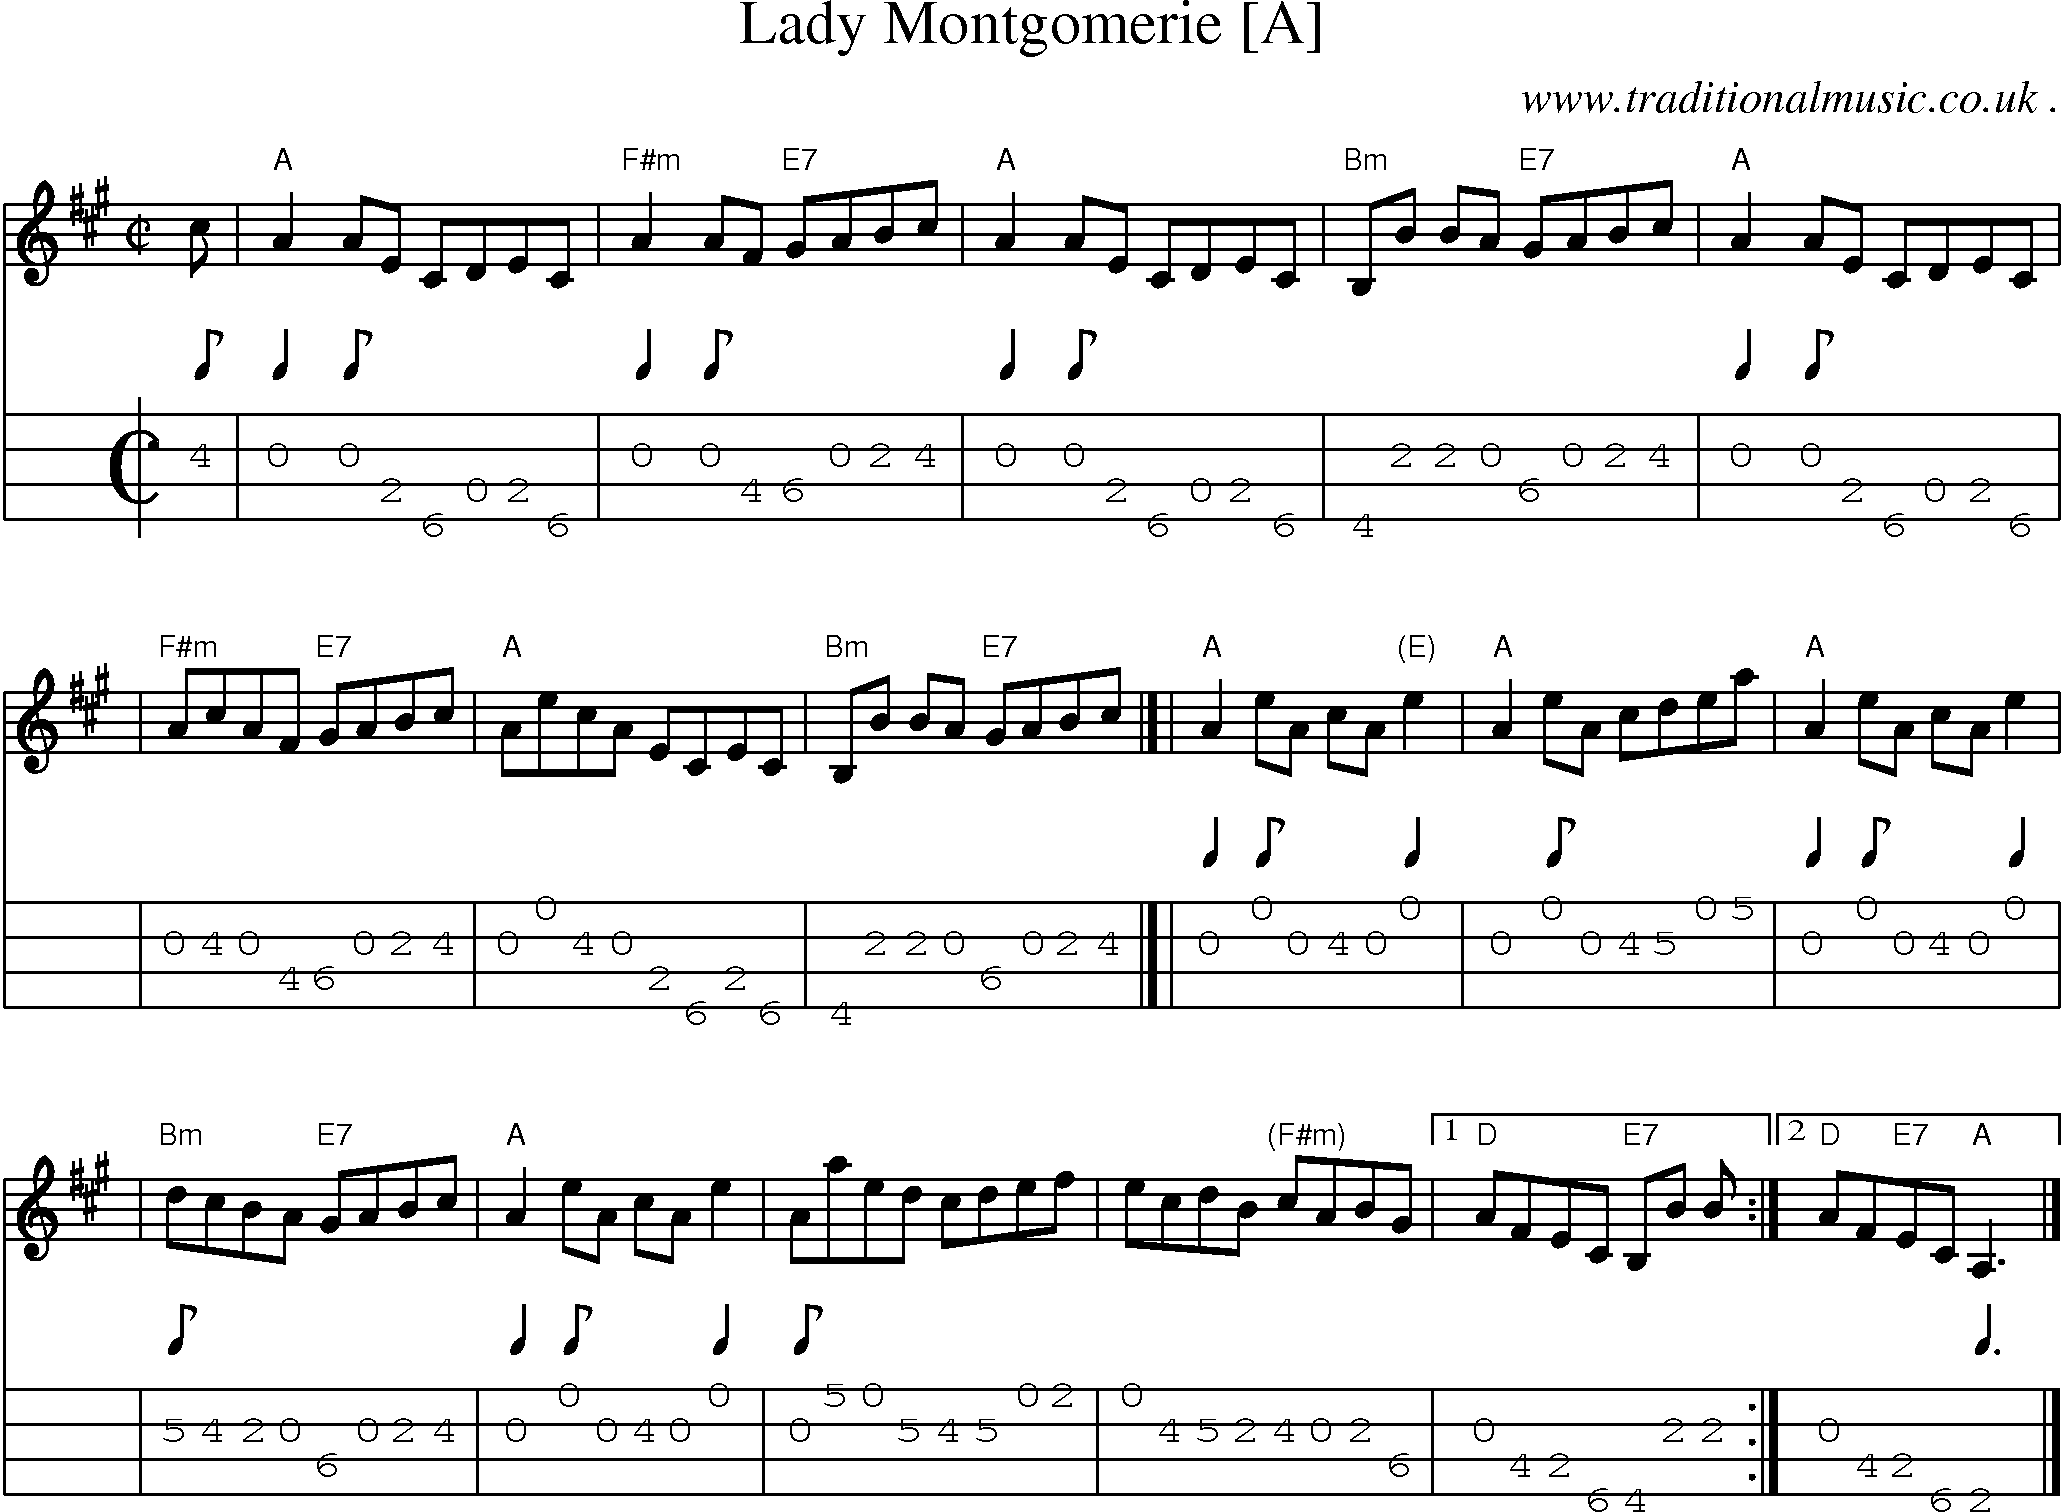 Sheet-music  score, Chords and Mandolin Tabs for Lady Montgomerie [a]